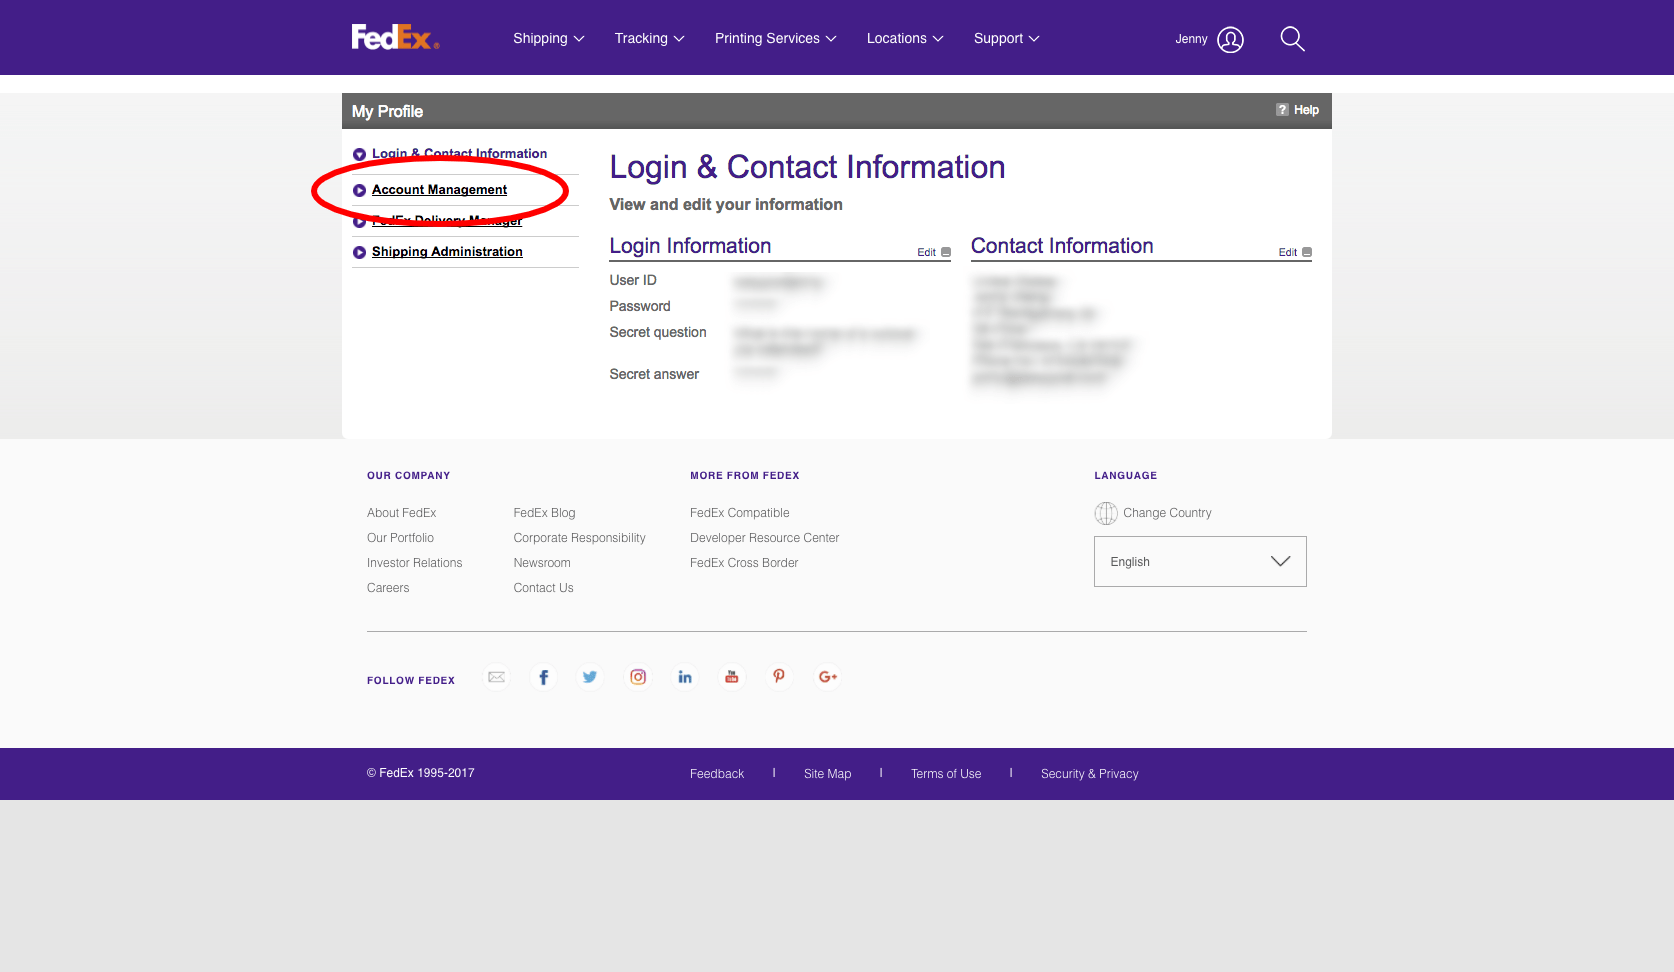 Fedex's My Profile page with the Account Management option highlighted